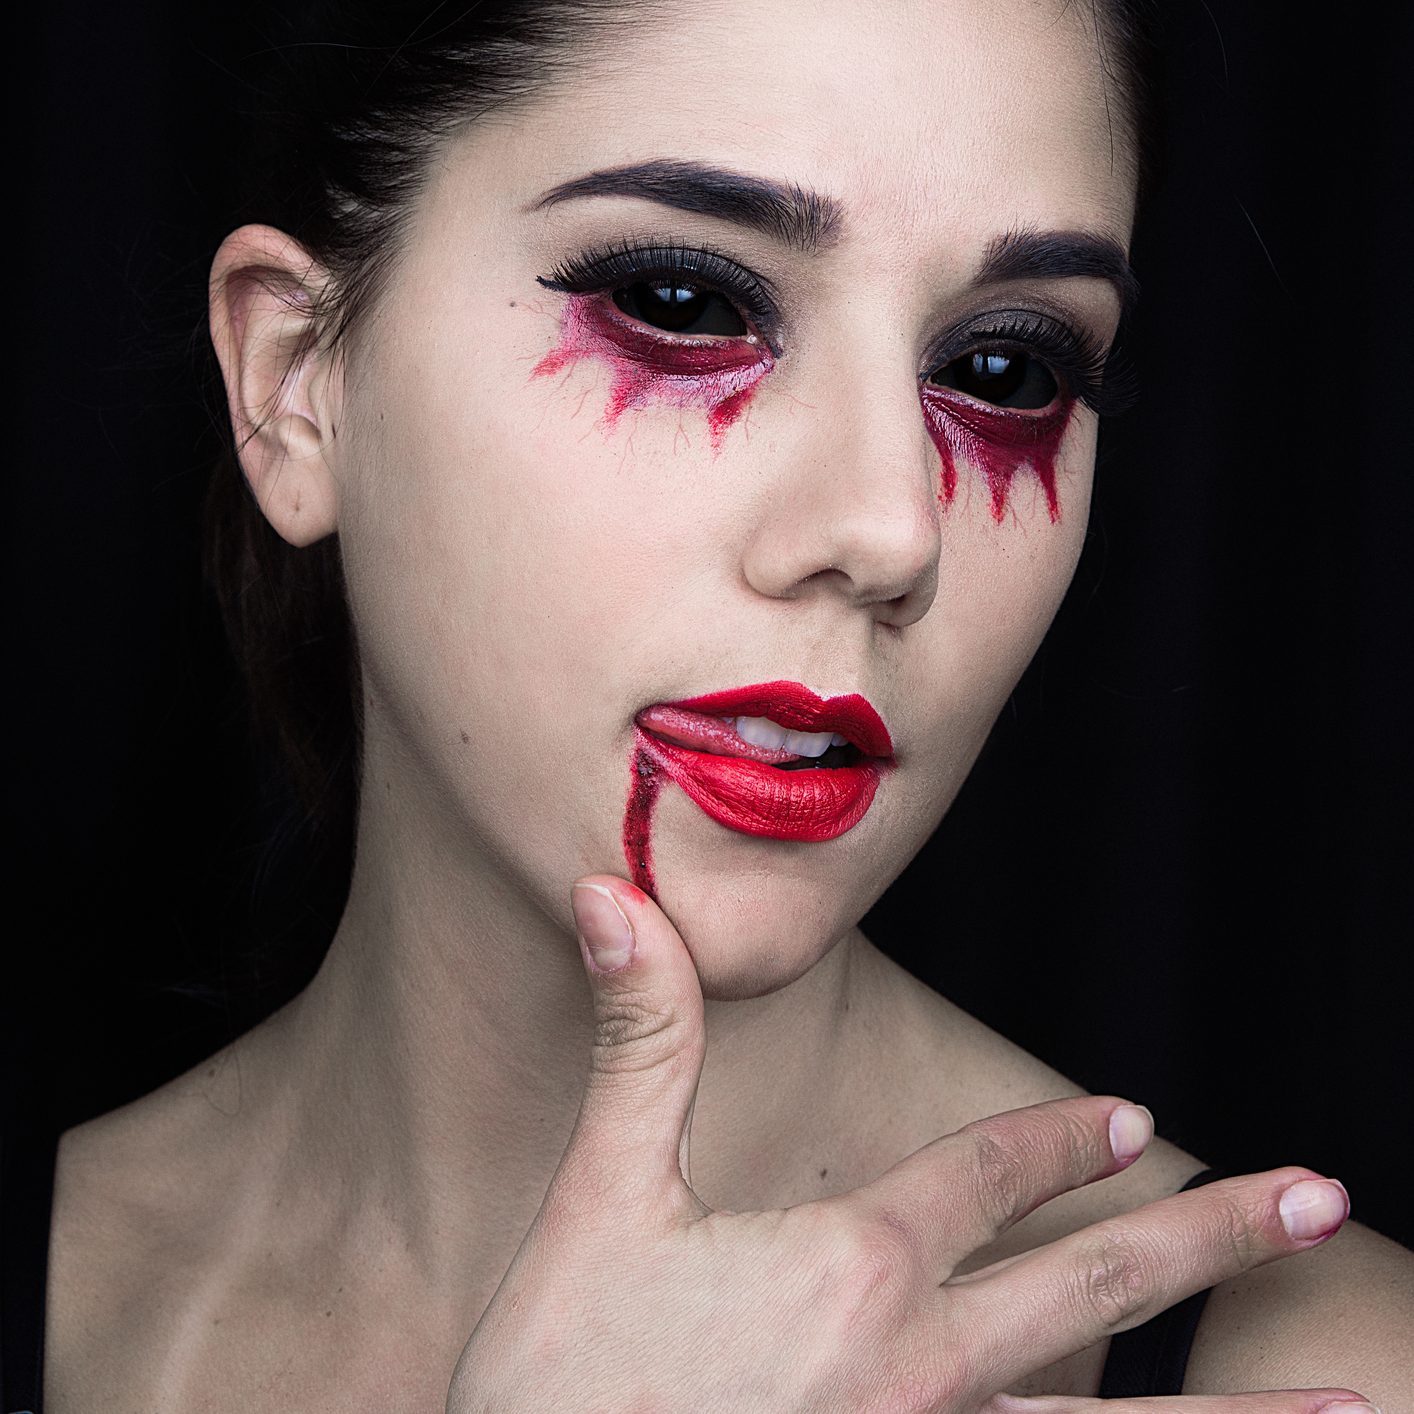 55 Halloween Makeup Ideas You'll Love in 2022